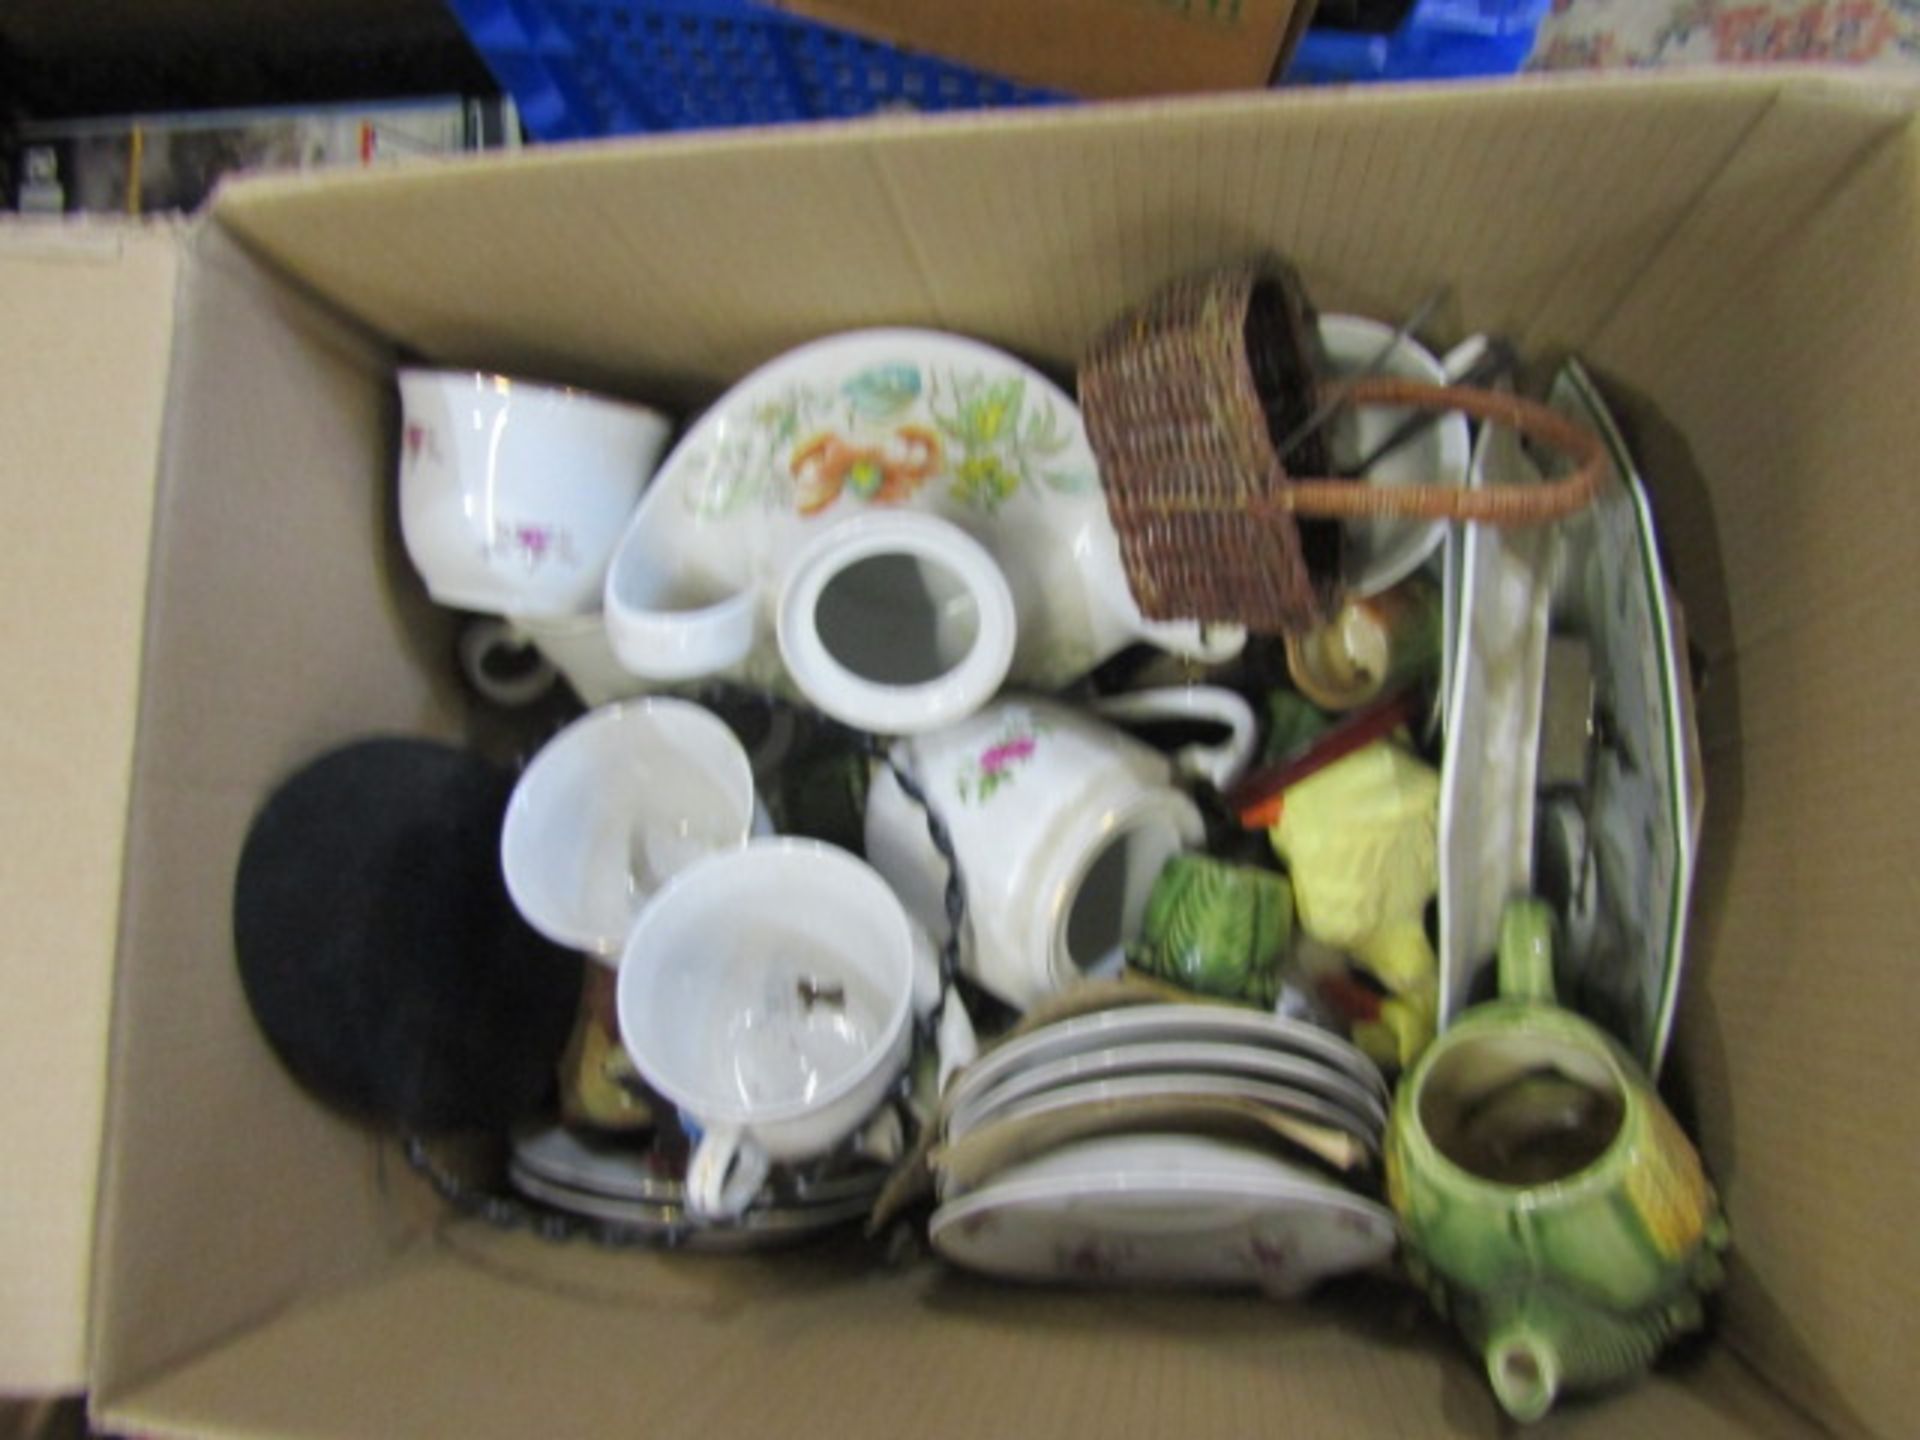 A stillage of china, glass and sundry items Stillage not included and all items must be removed - Image 3 of 15